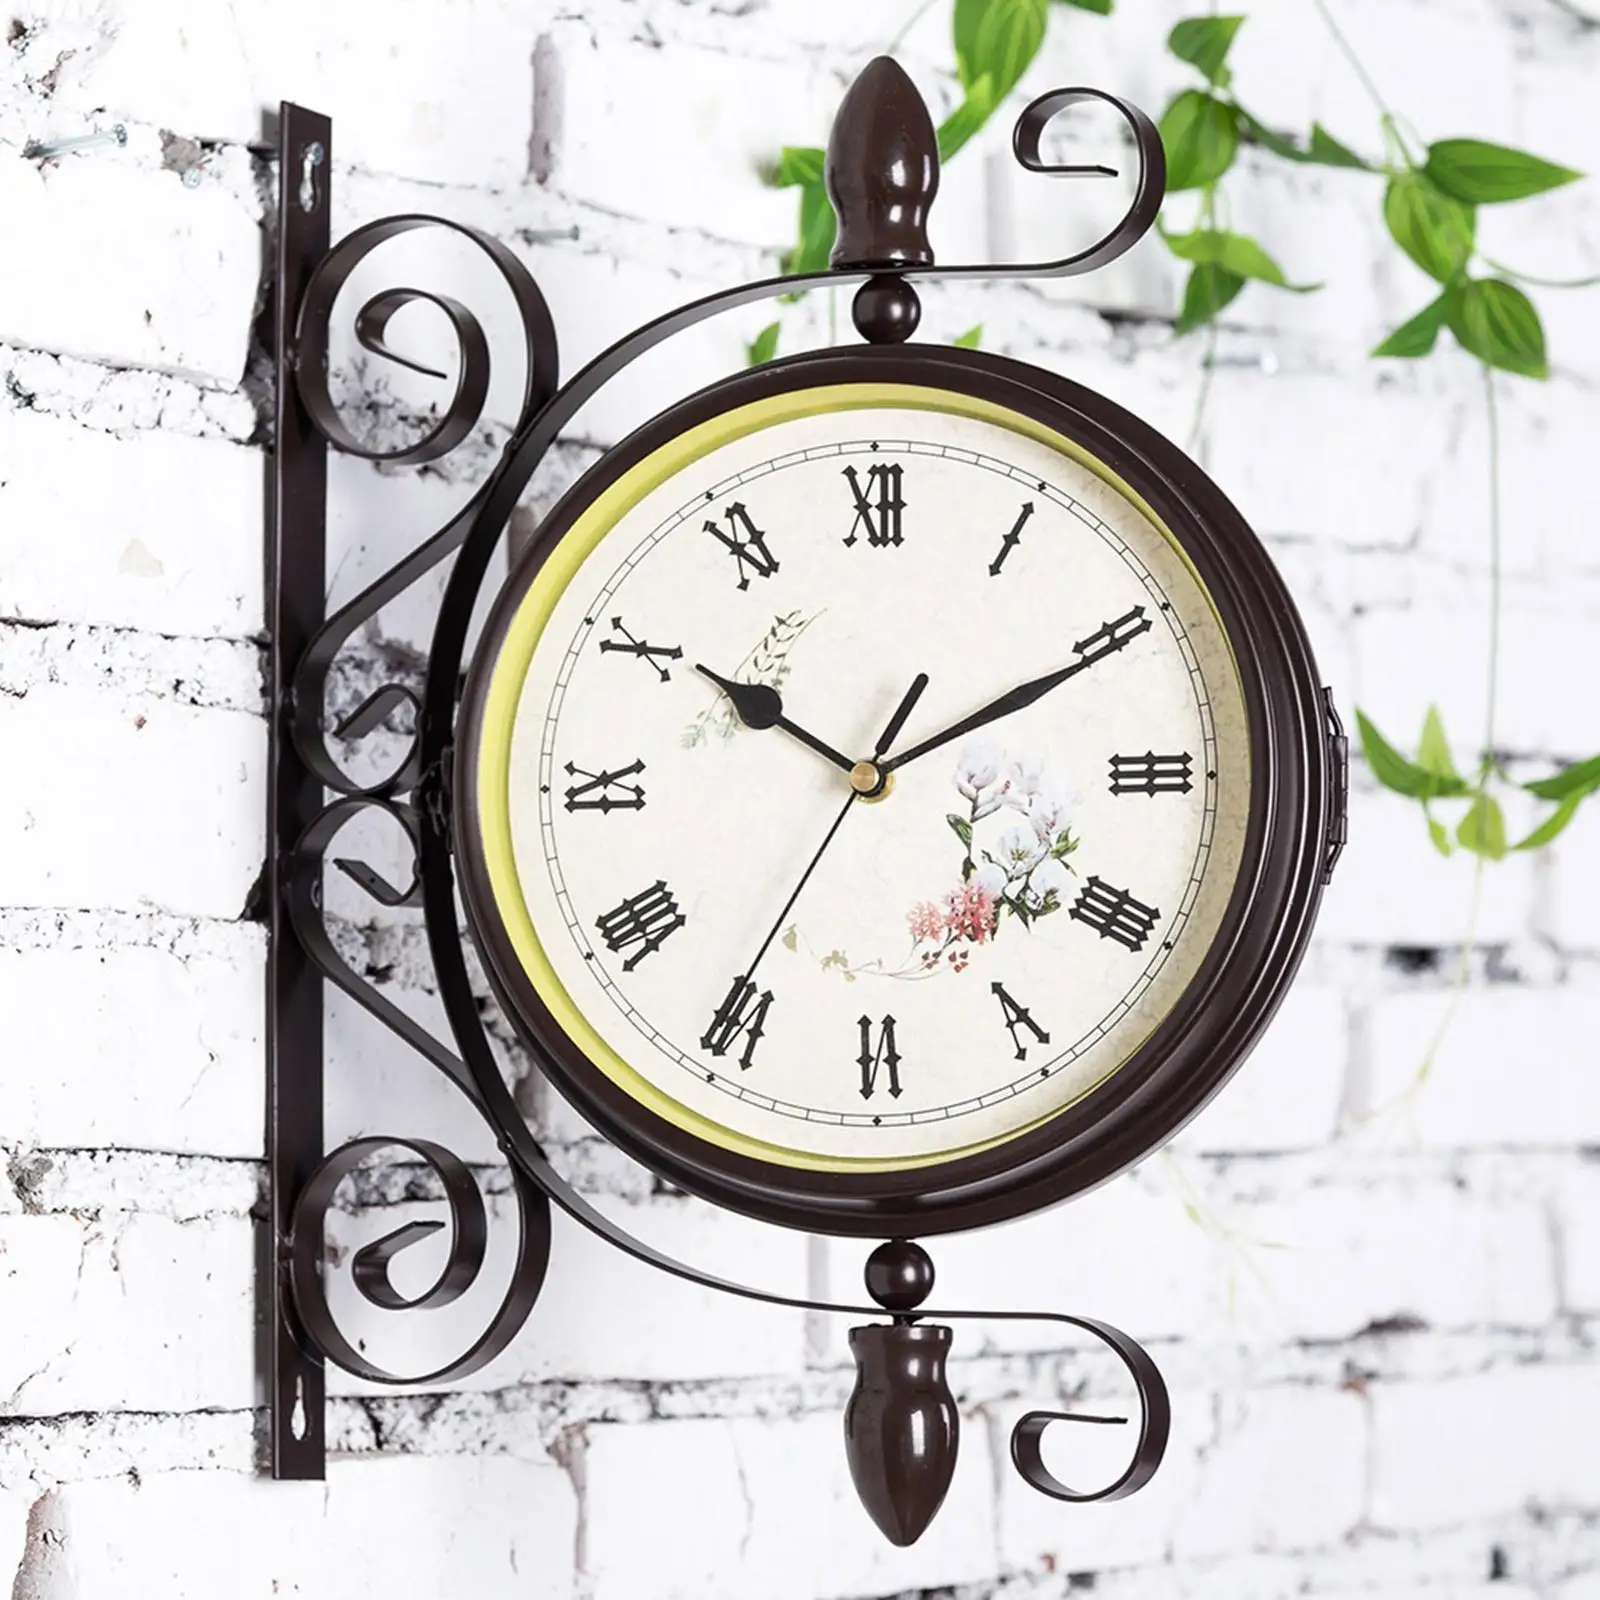 Retro Style Double Sided Wall Clock Mute Decorative Battery Powered Wall Mount Clocks for Living Room Patio Garden Bedroom Home